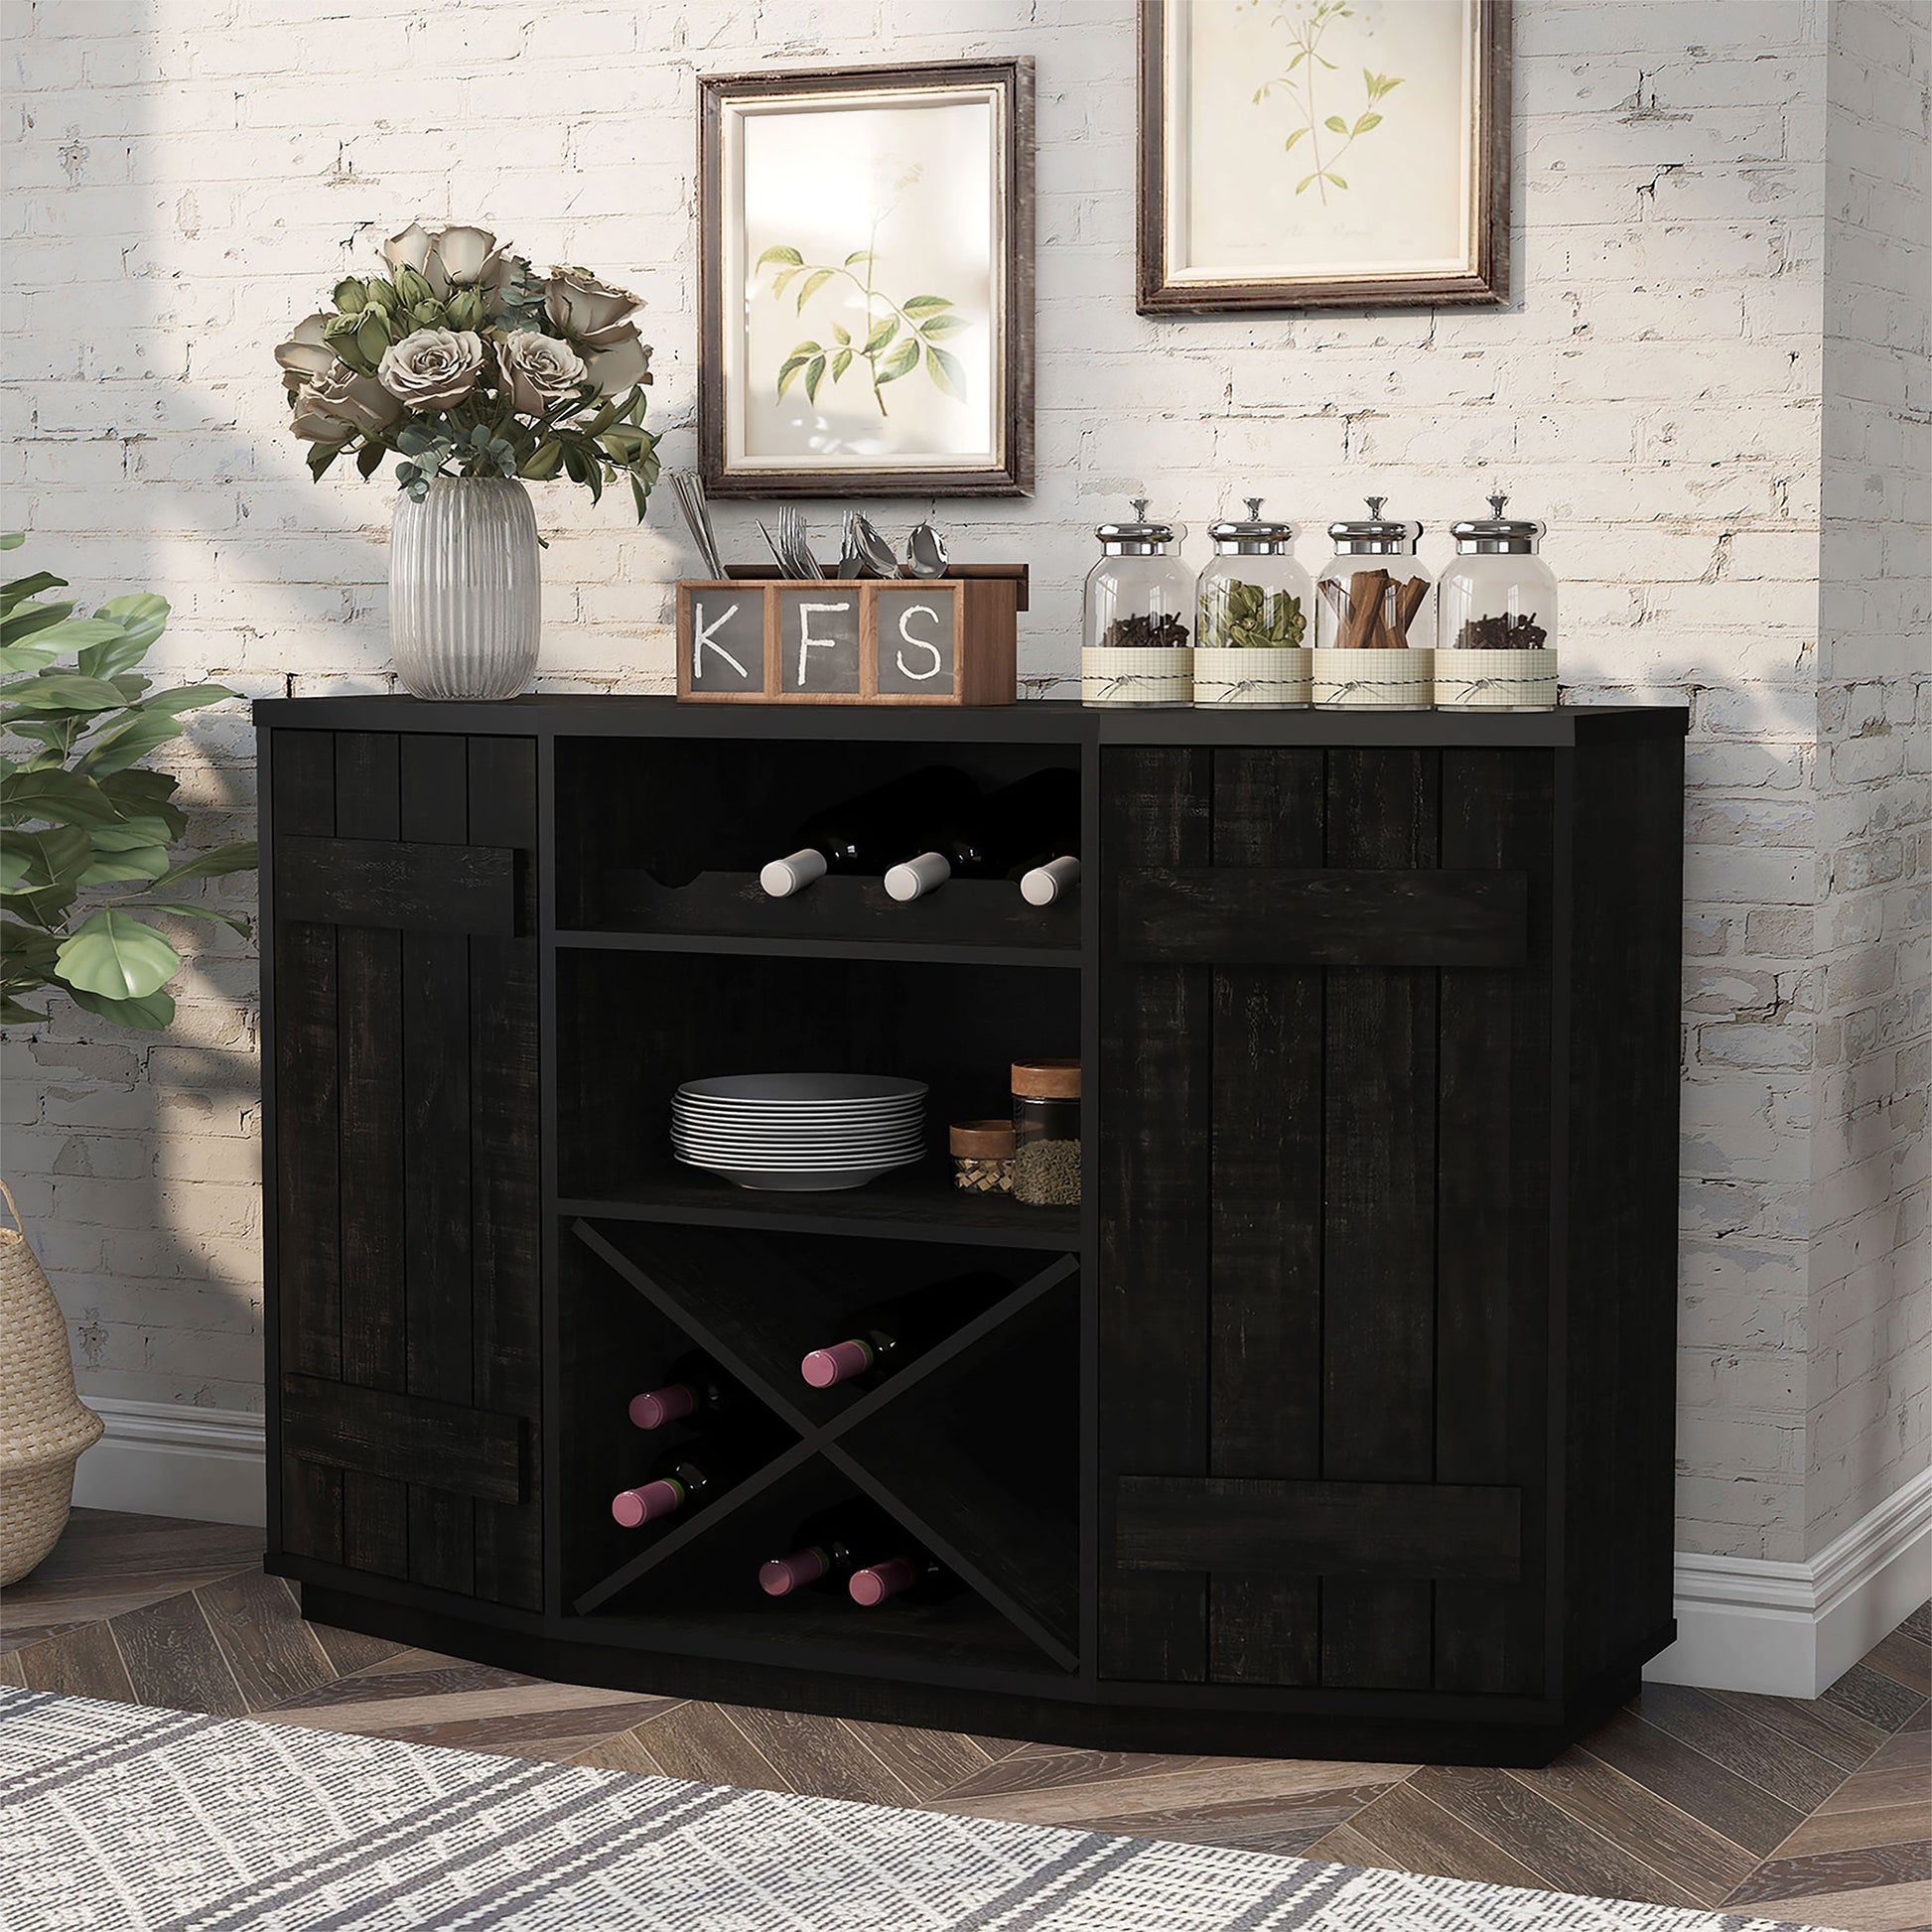 Left angled farmhouse reclaimed black two-door 28-bottle wine cabinet buffet in a dining room with accessories